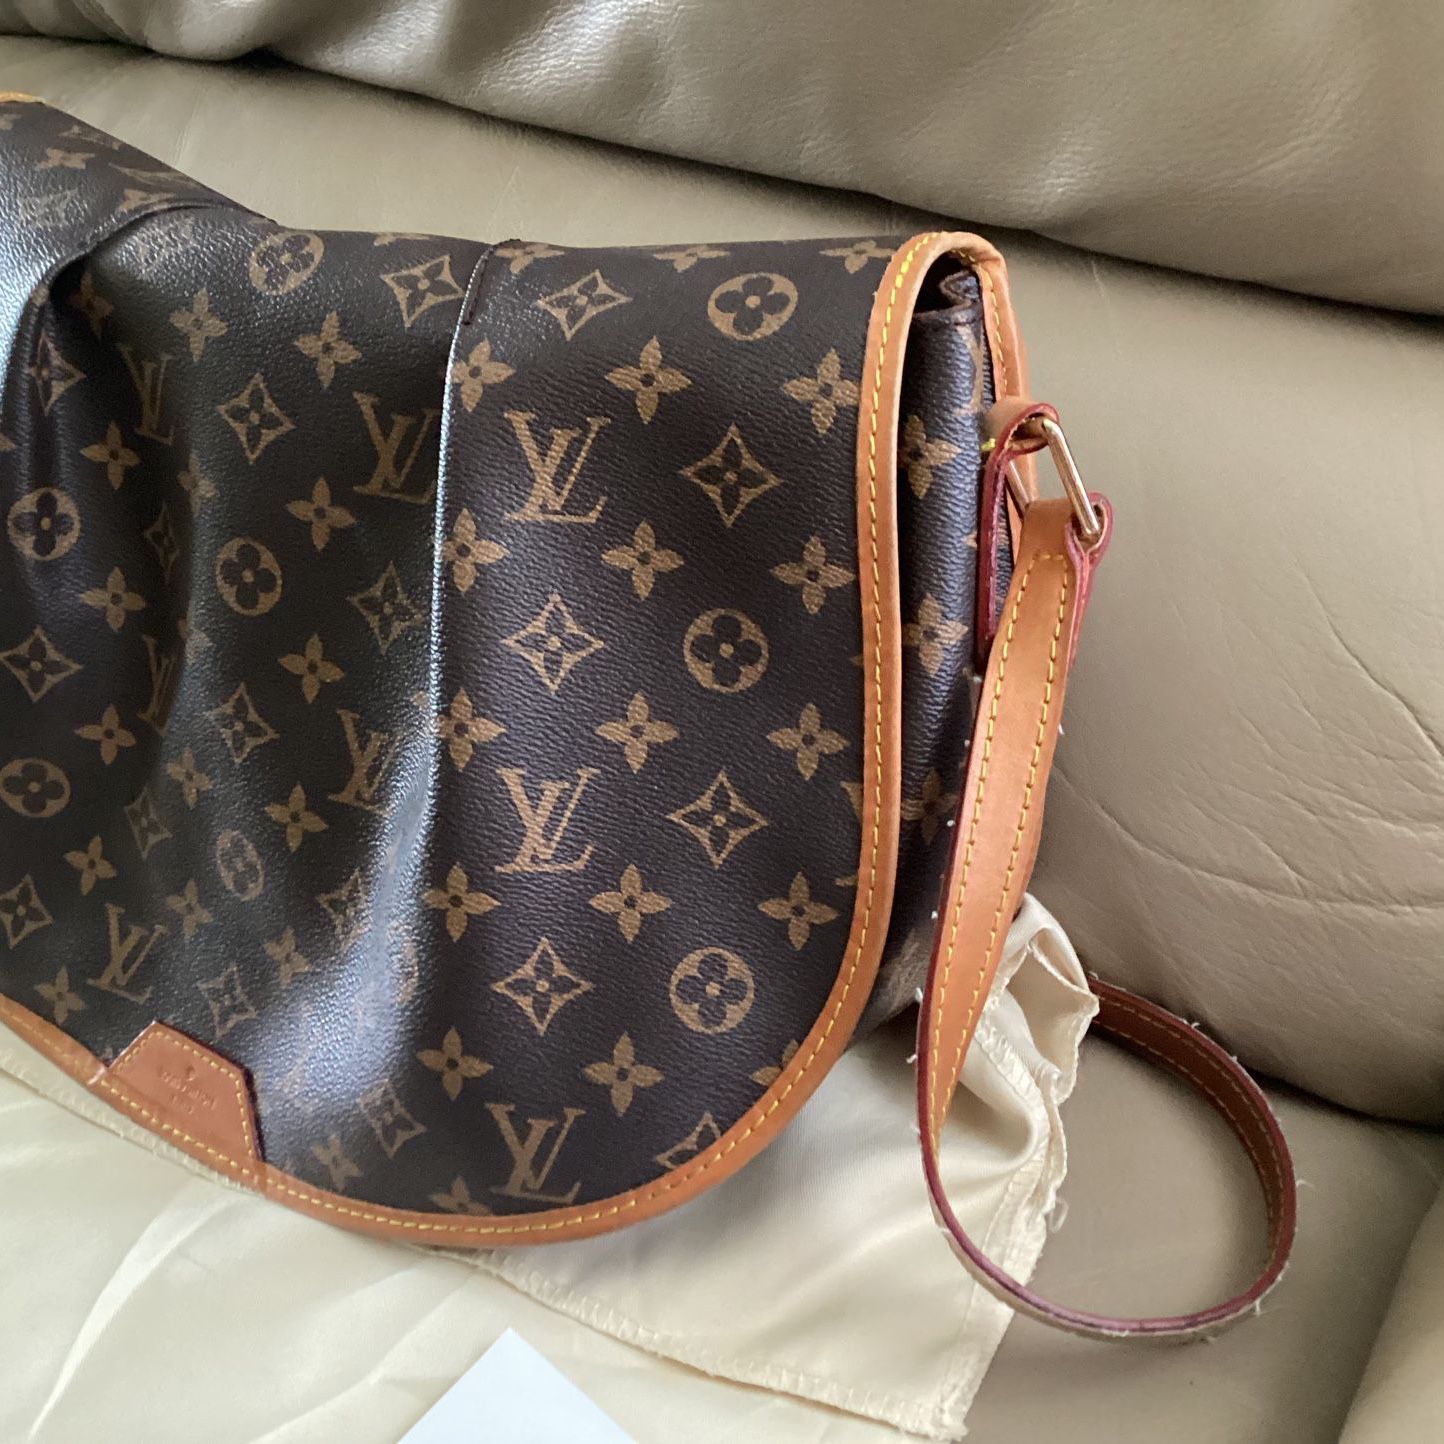 LV Neverfull for Sale in Sugar Hill, GA - OfferUp